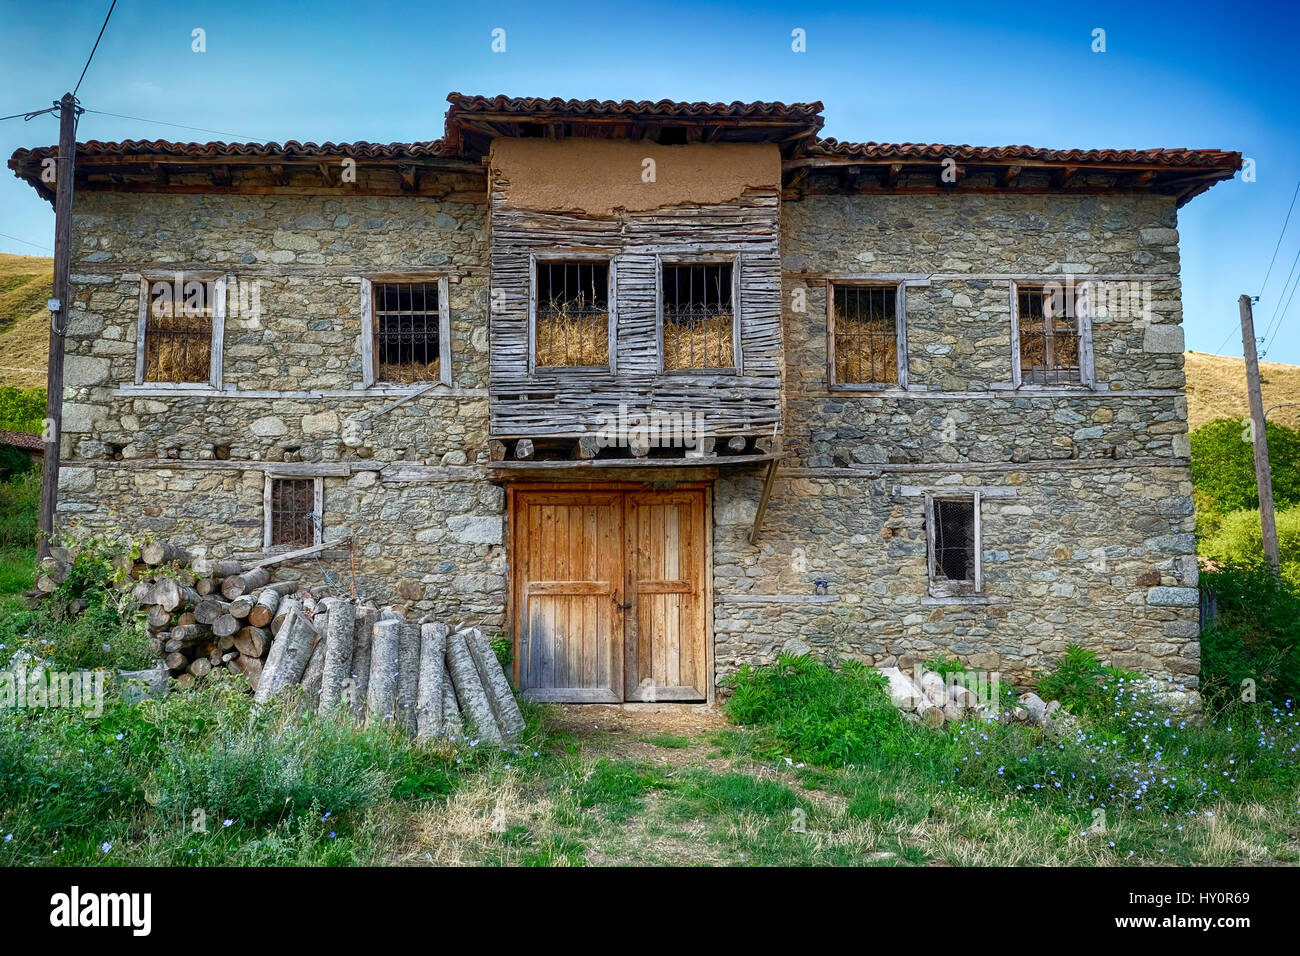 abandoned stone house with firewood next to the front door filled with straw Stock Photo